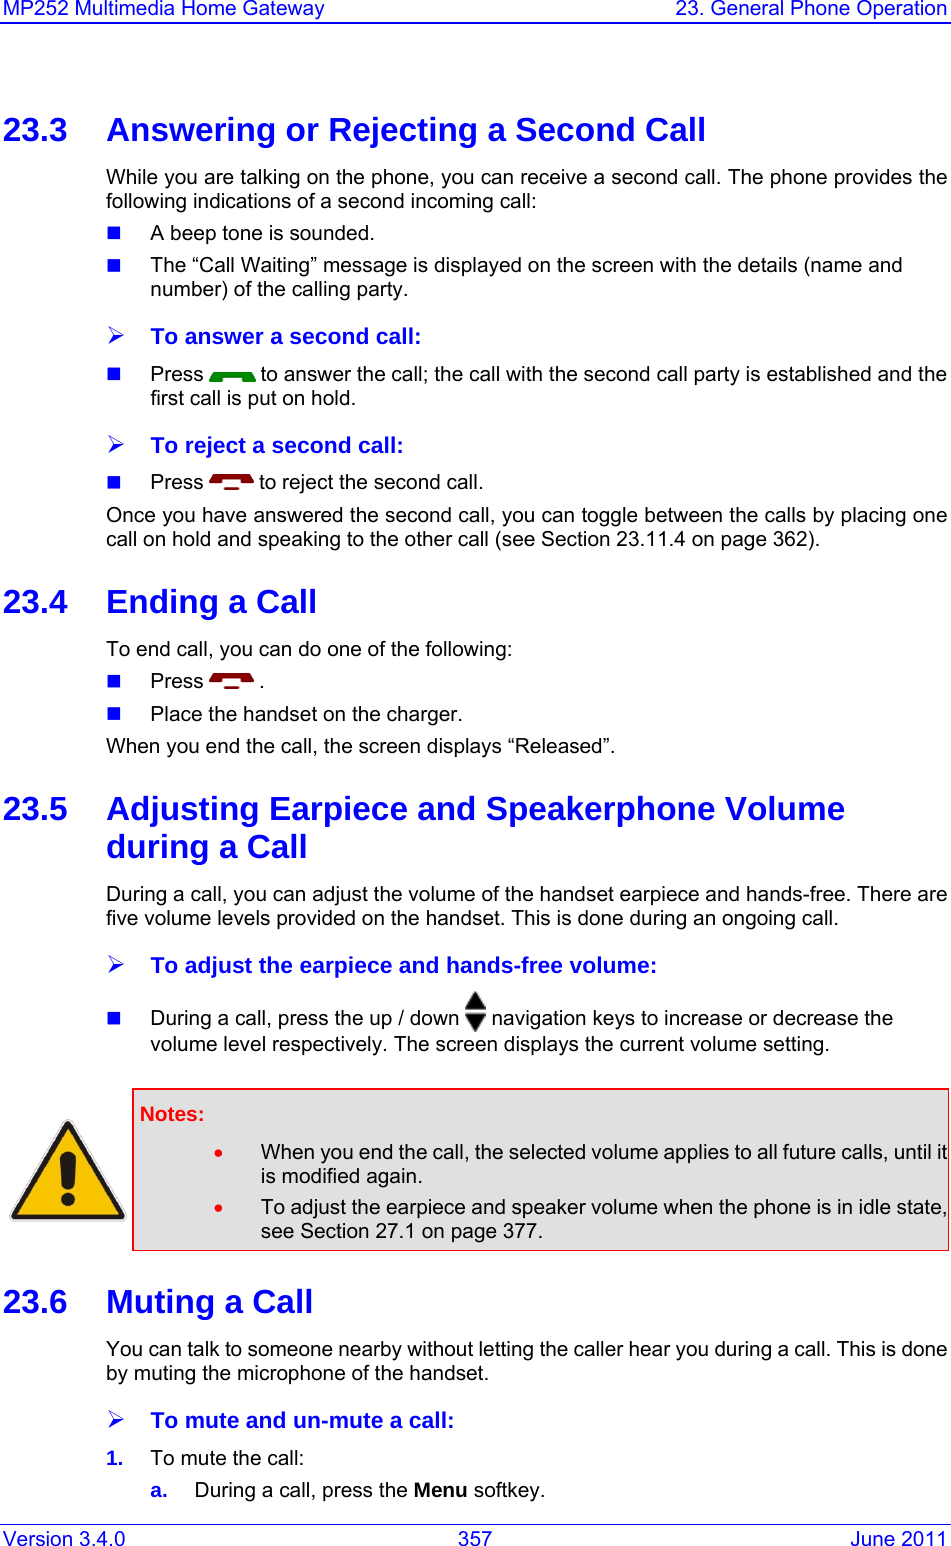 Version 3.4.0  357  June 2011 MP252 Multimedia Home Gateway  23. General Phone Operation  23.3  Answering or Rejecting a Second Call While you are talking on the phone, you can receive a second call. The phone provides the following indications of a second incoming call:  A beep tone is sounded.  The “Call Waiting” message is displayed on the screen with the details (name and number) of the calling party. ¾ To answer a second call:  Press   to answer the call; the call with the second call party is established and the first call is put on hold. ¾ To reject a second call:  Press   to reject the second call. Once you have answered the second call, you can toggle between the calls by placing one call on hold and speaking to the other call (see Section 23.11.4 on page 362). 23.4  Ending a Call To end call, you can do one of the following:  Press   .  Place the handset on the charger. When you end the call, the screen displays “Released”. 23.5  Adjusting Earpiece and Speakerphone Volume during a Call During a call, you can adjust the volume of the handset earpiece and hands-free. There are five volume levels provided on the handset. This is done during an ongoing call. ¾ To adjust the earpiece and hands-free volume:  During a call, press the up / down   navigation keys to increase or decrease the volume level respectively. The screen displays the current volume setting.    Notes:  • When you end the call, the selected volume applies to all future calls, until it is modified again. • To adjust the earpiece and speaker volume when the phone is in idle state, see Section 27.1 on page 377. 23.6  Muting a Call You can talk to someone nearby without letting the caller hear you during a call. This is done by muting the microphone of the handset. ¾ To mute and un-mute a call: 1.  To mute the call: a.  During a call, press the Menu softkey. 